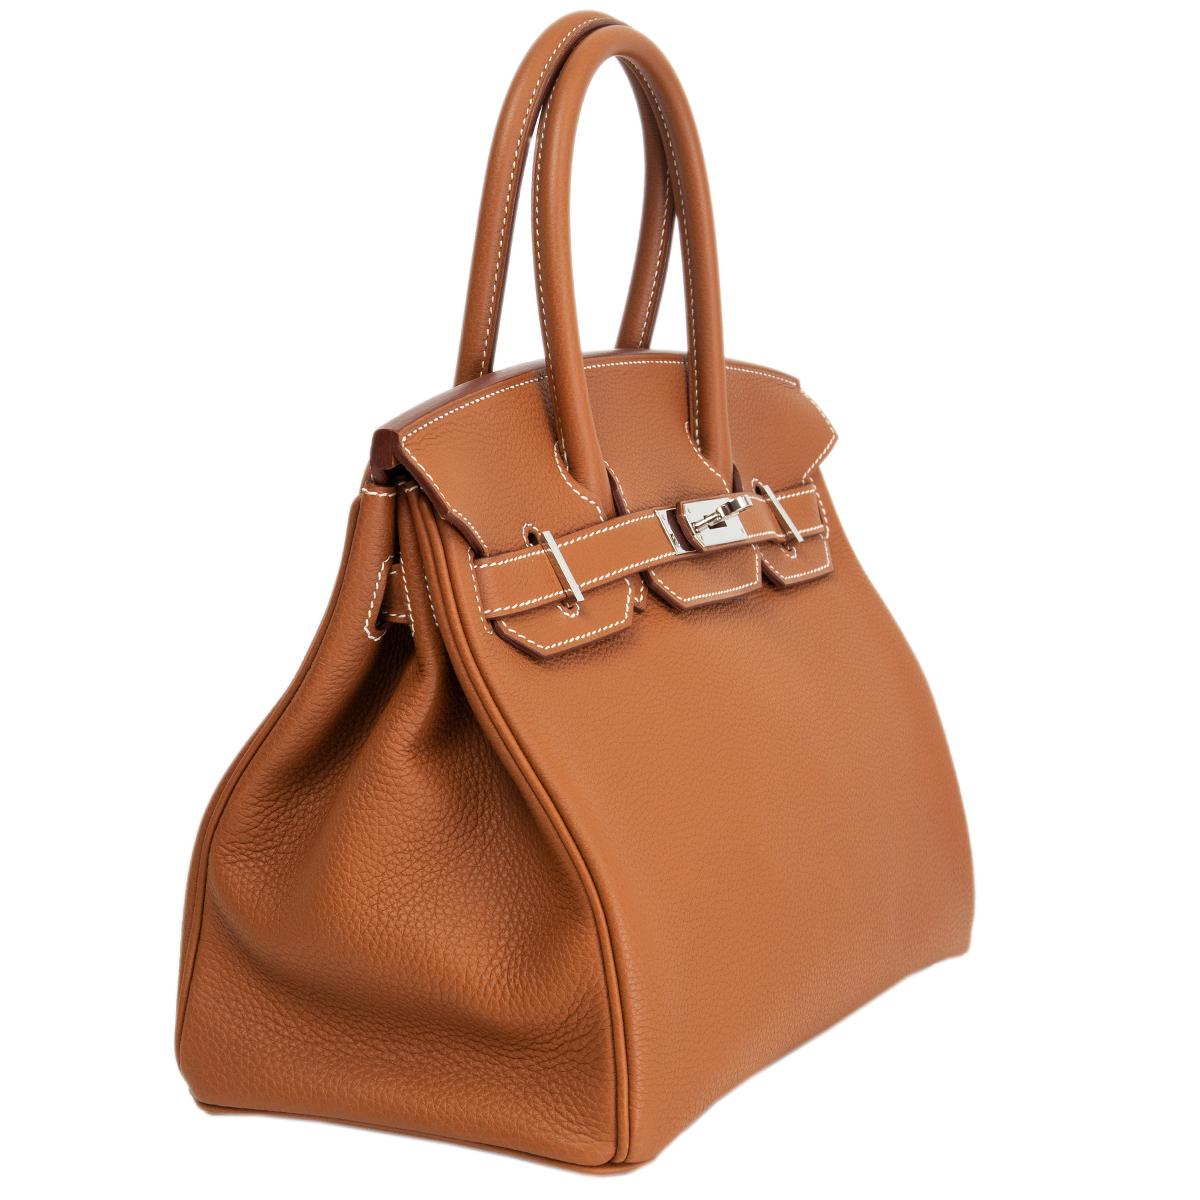 100% authentic Hermès Birkin 30 bag in Gold (camel brown) Veau Togo leather with contrasting white stitching and Palladium hardware. Lined in Chevre (goat skin) with an open pocket against the front and a zipper pocket against the back. Has never